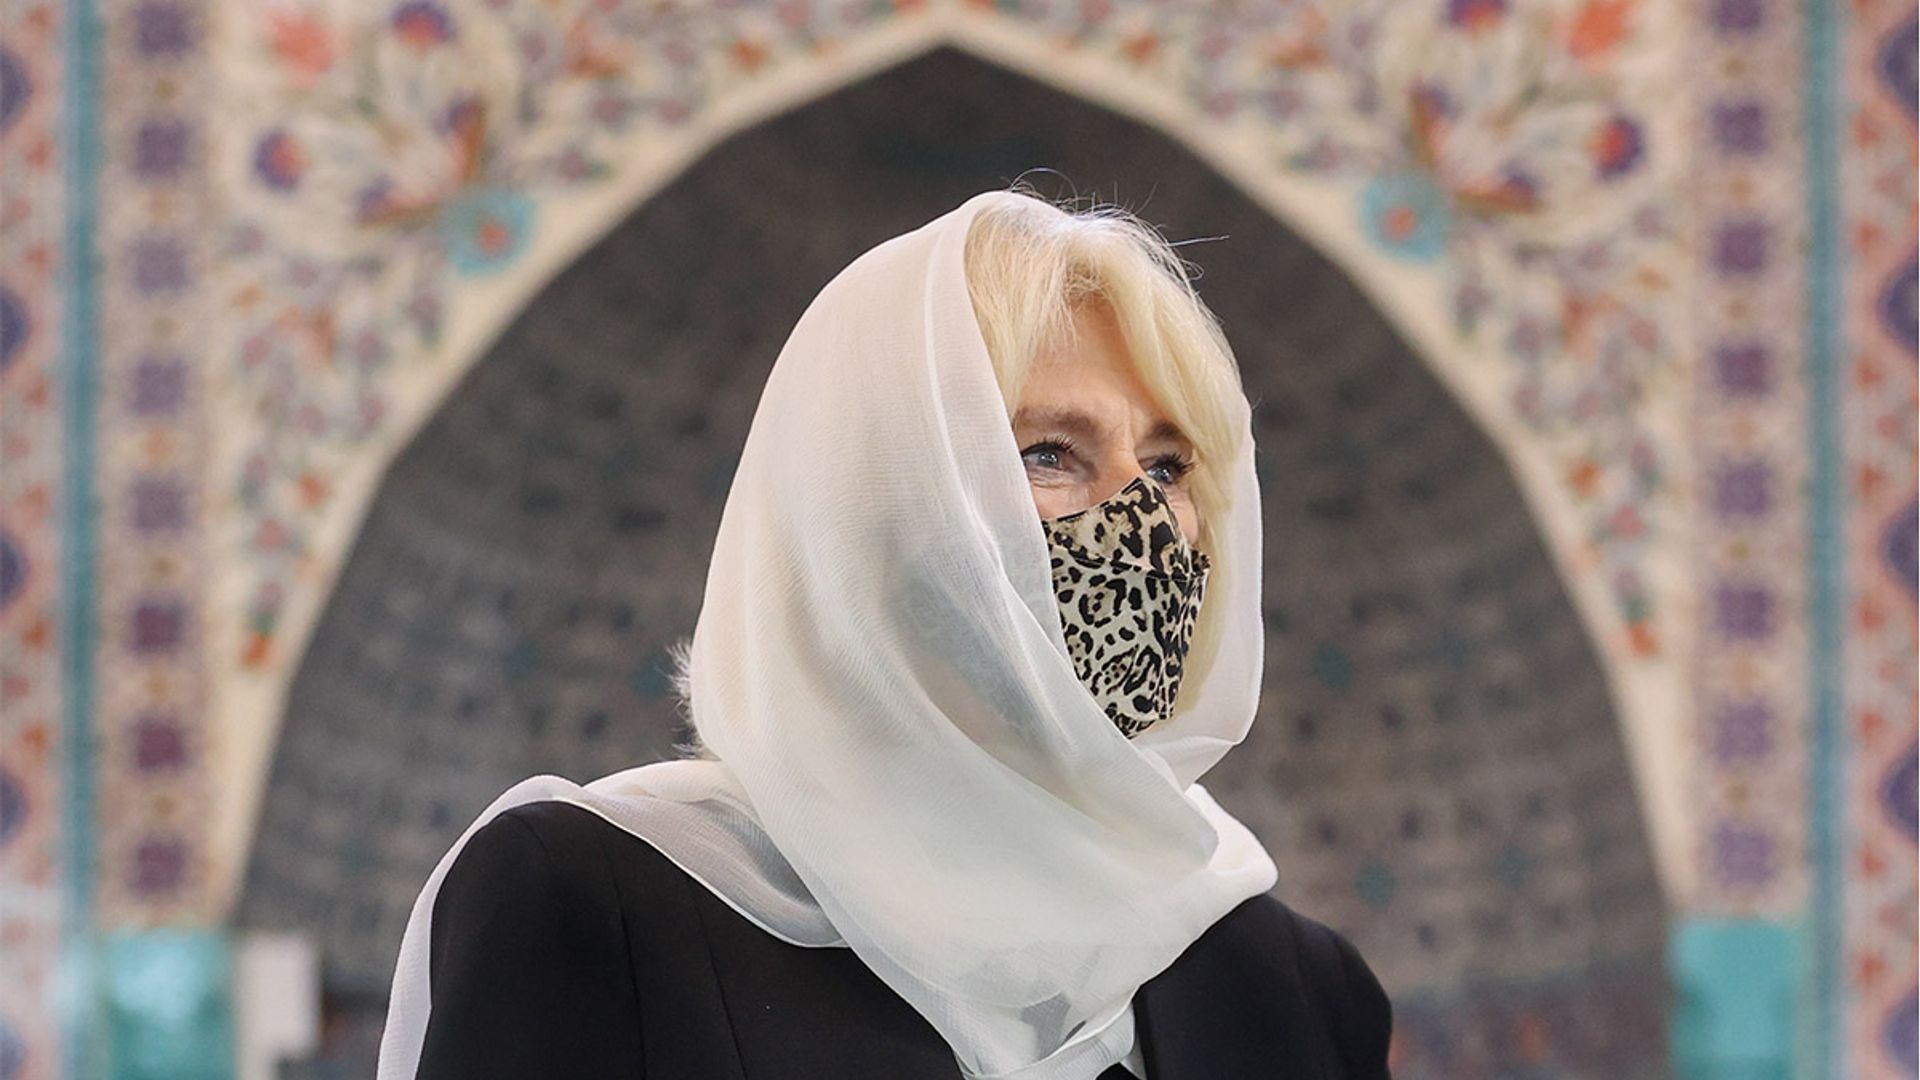 The Duchess of Cornwall rocks white headscarf and unique faux fur accessory at London Mosque